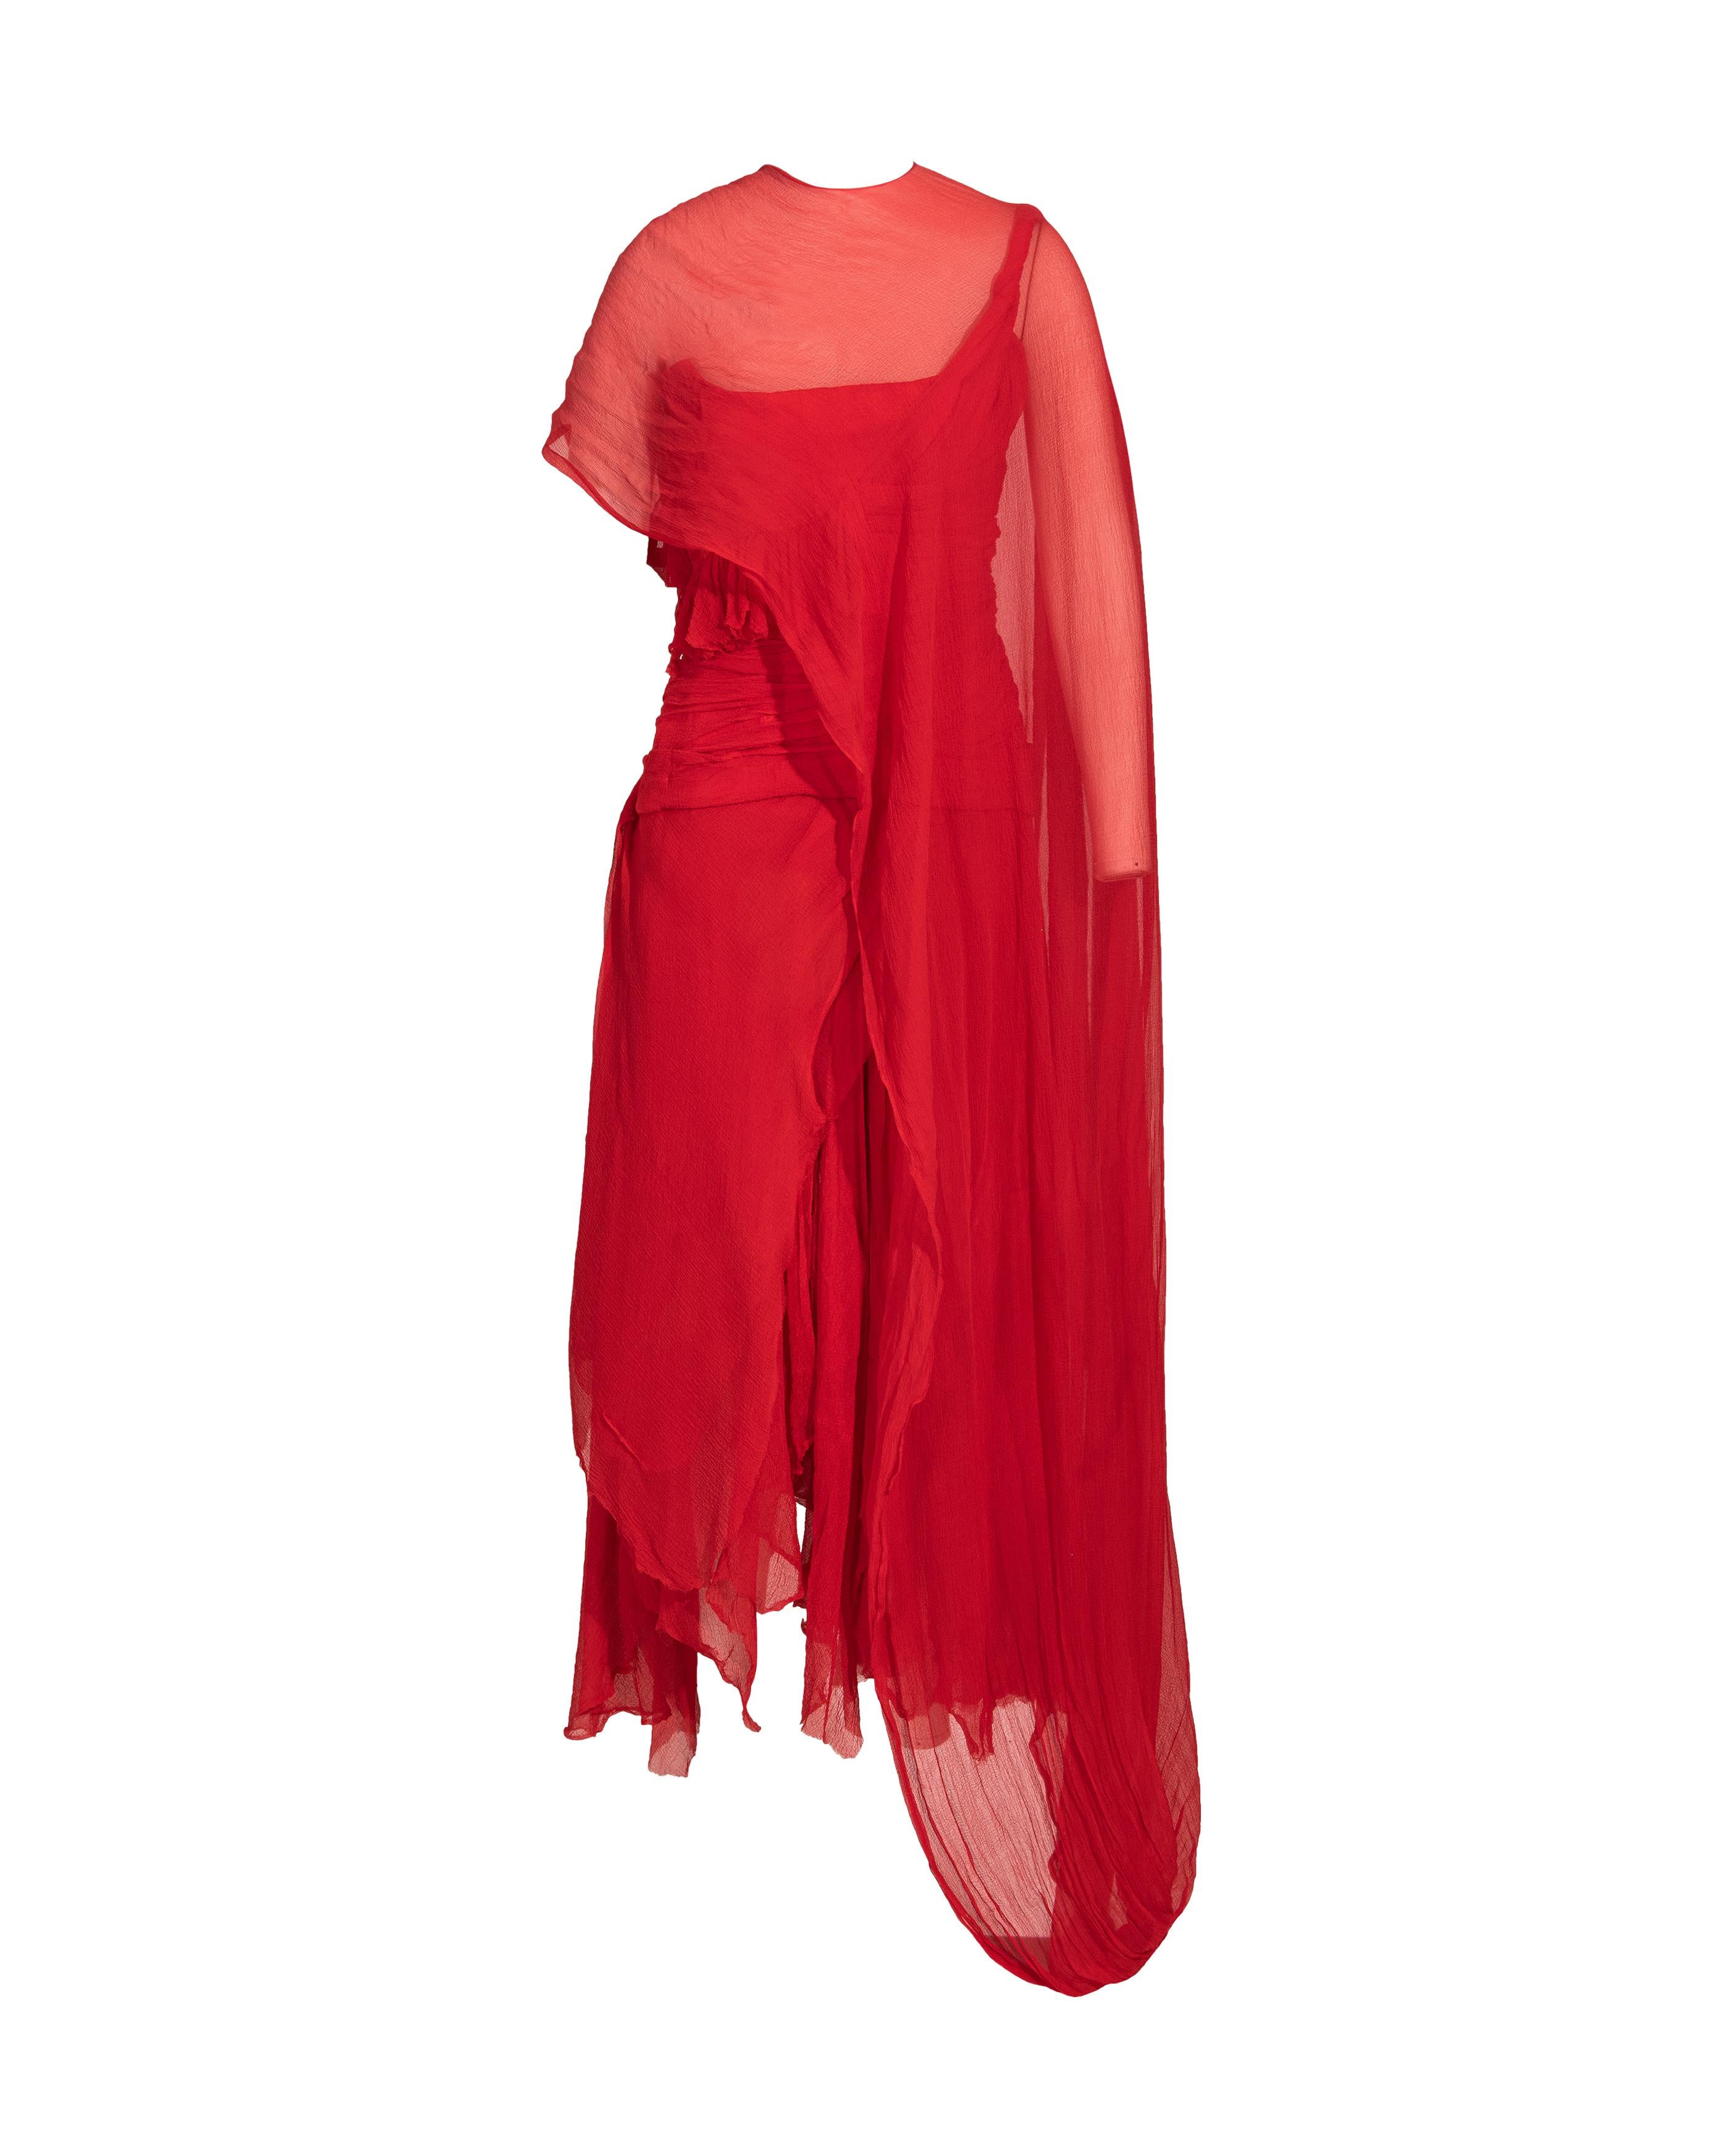 S/S 2003 Alexander McQueen  'Irere' Collection Red Silk Chiffon Gown with Sash 8